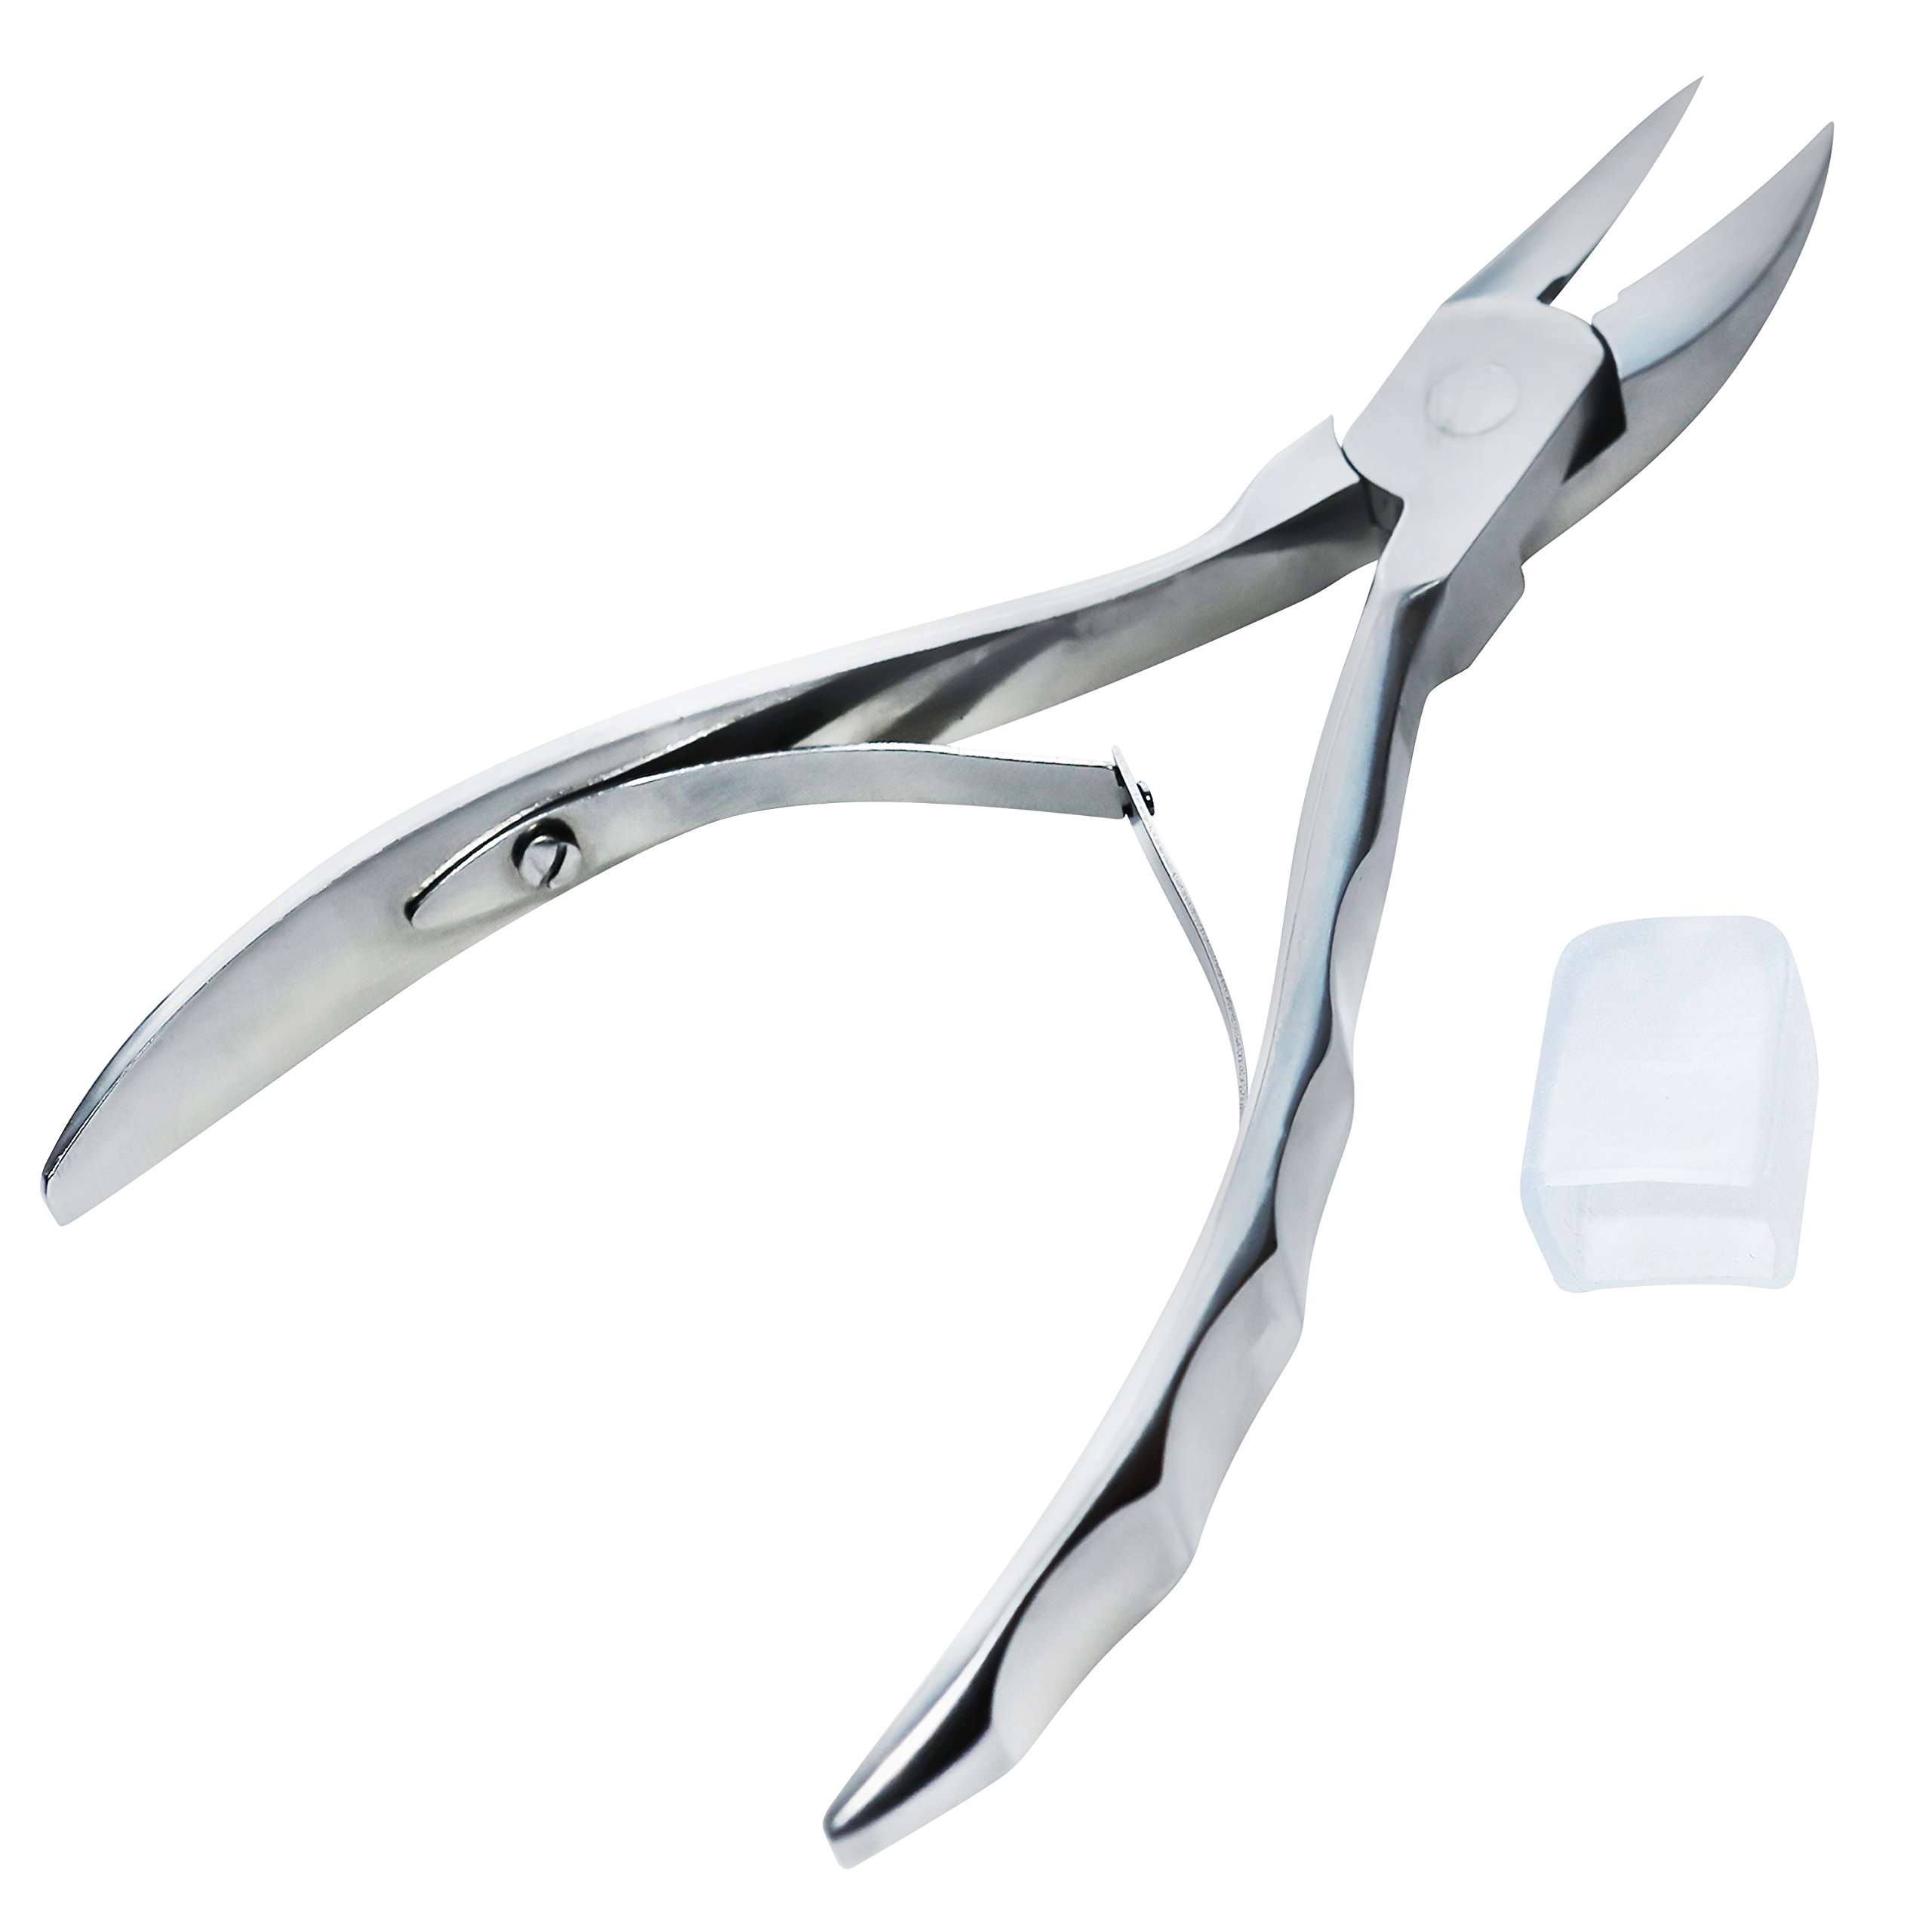 Surgical Stainless Steel Toenail Clippers for Thick and Ingrown